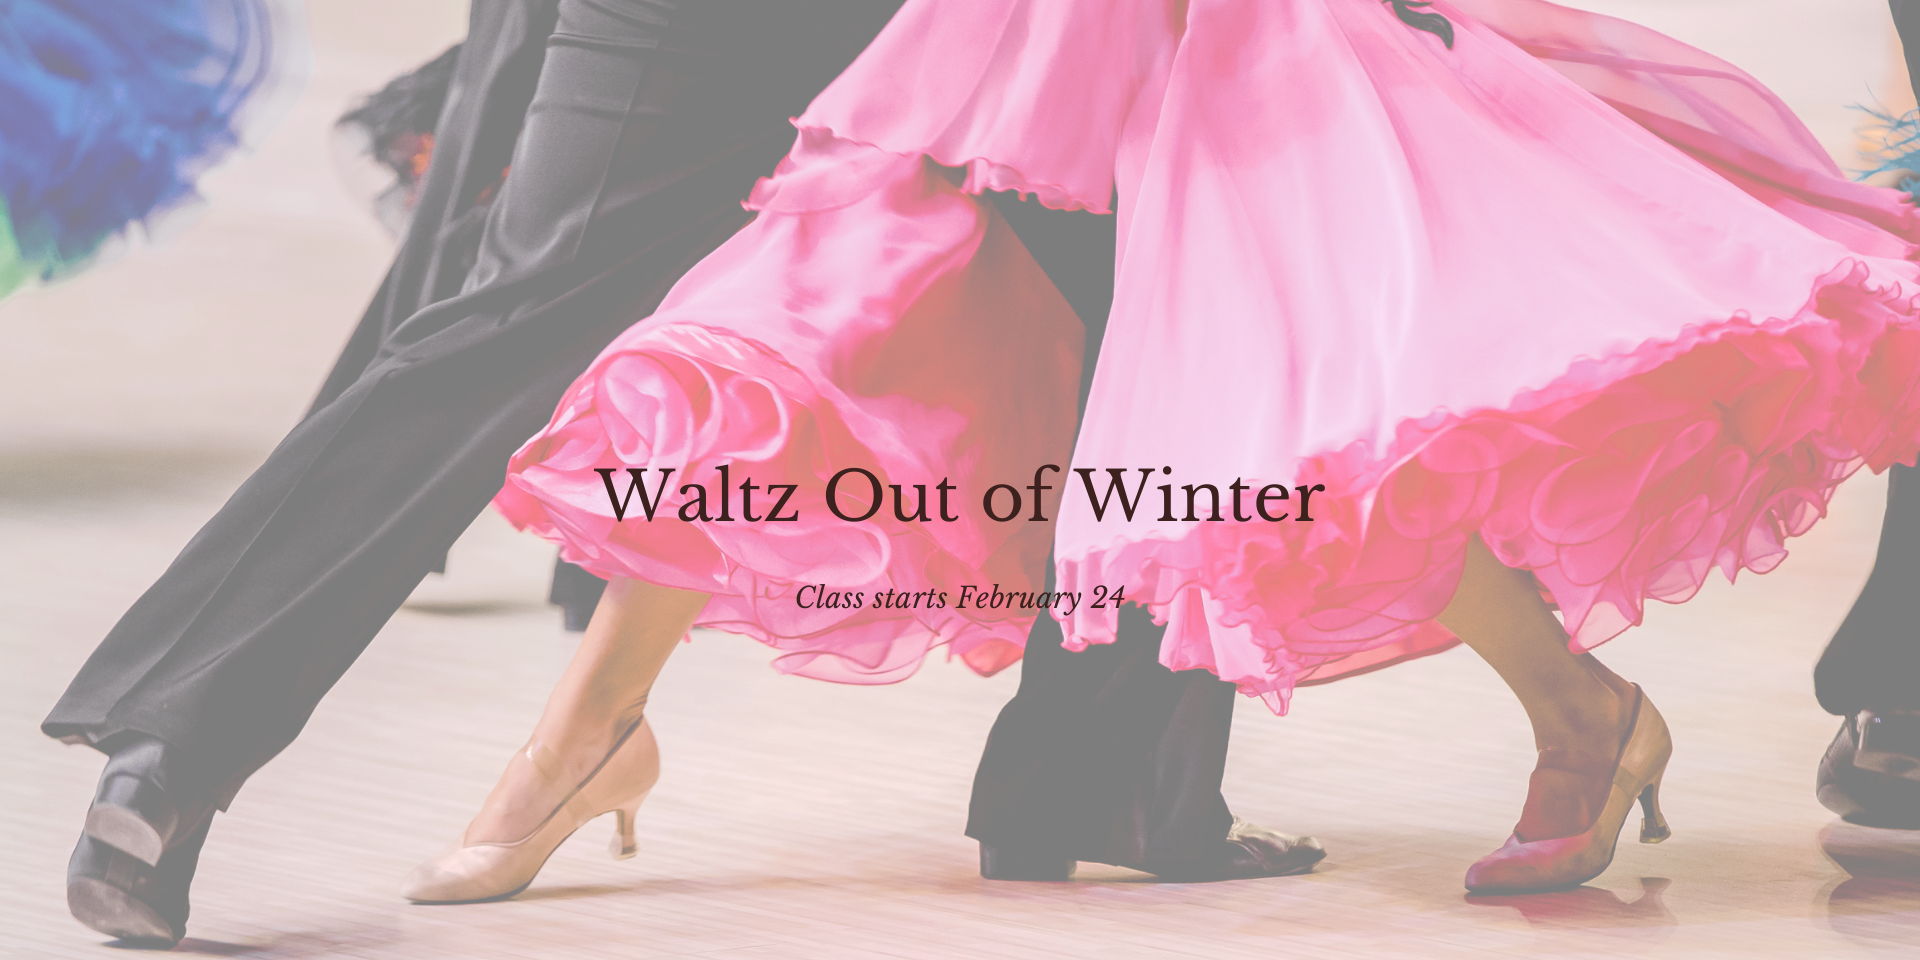 Waltz Out of Winter promotional image